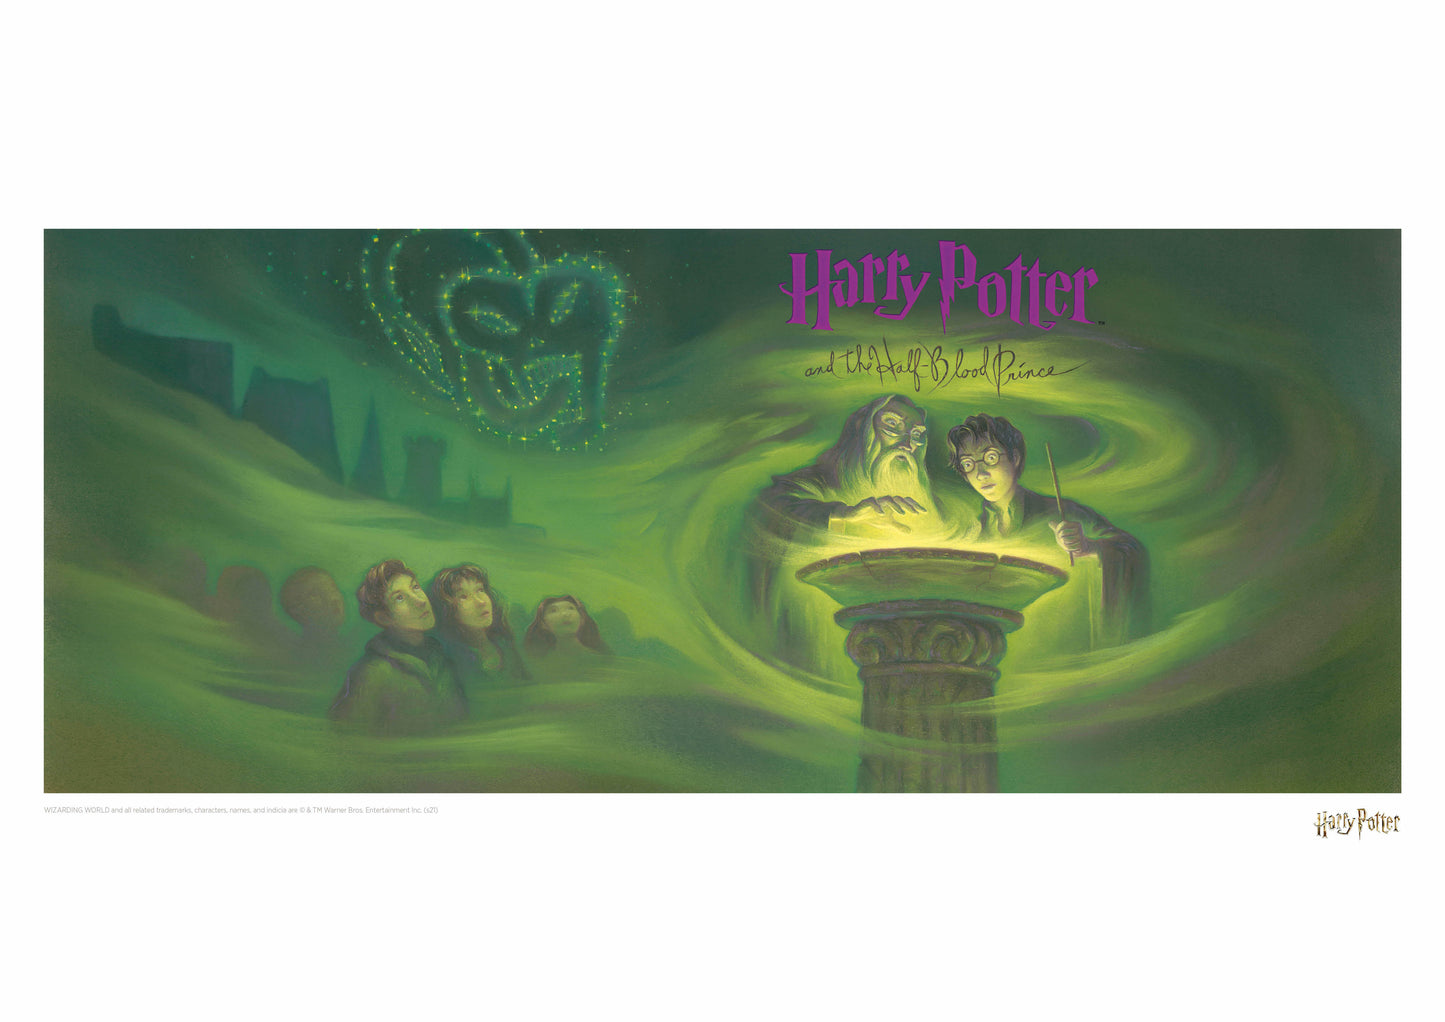 Harry Potter Book Cover - The Half Blood Prince Artwork